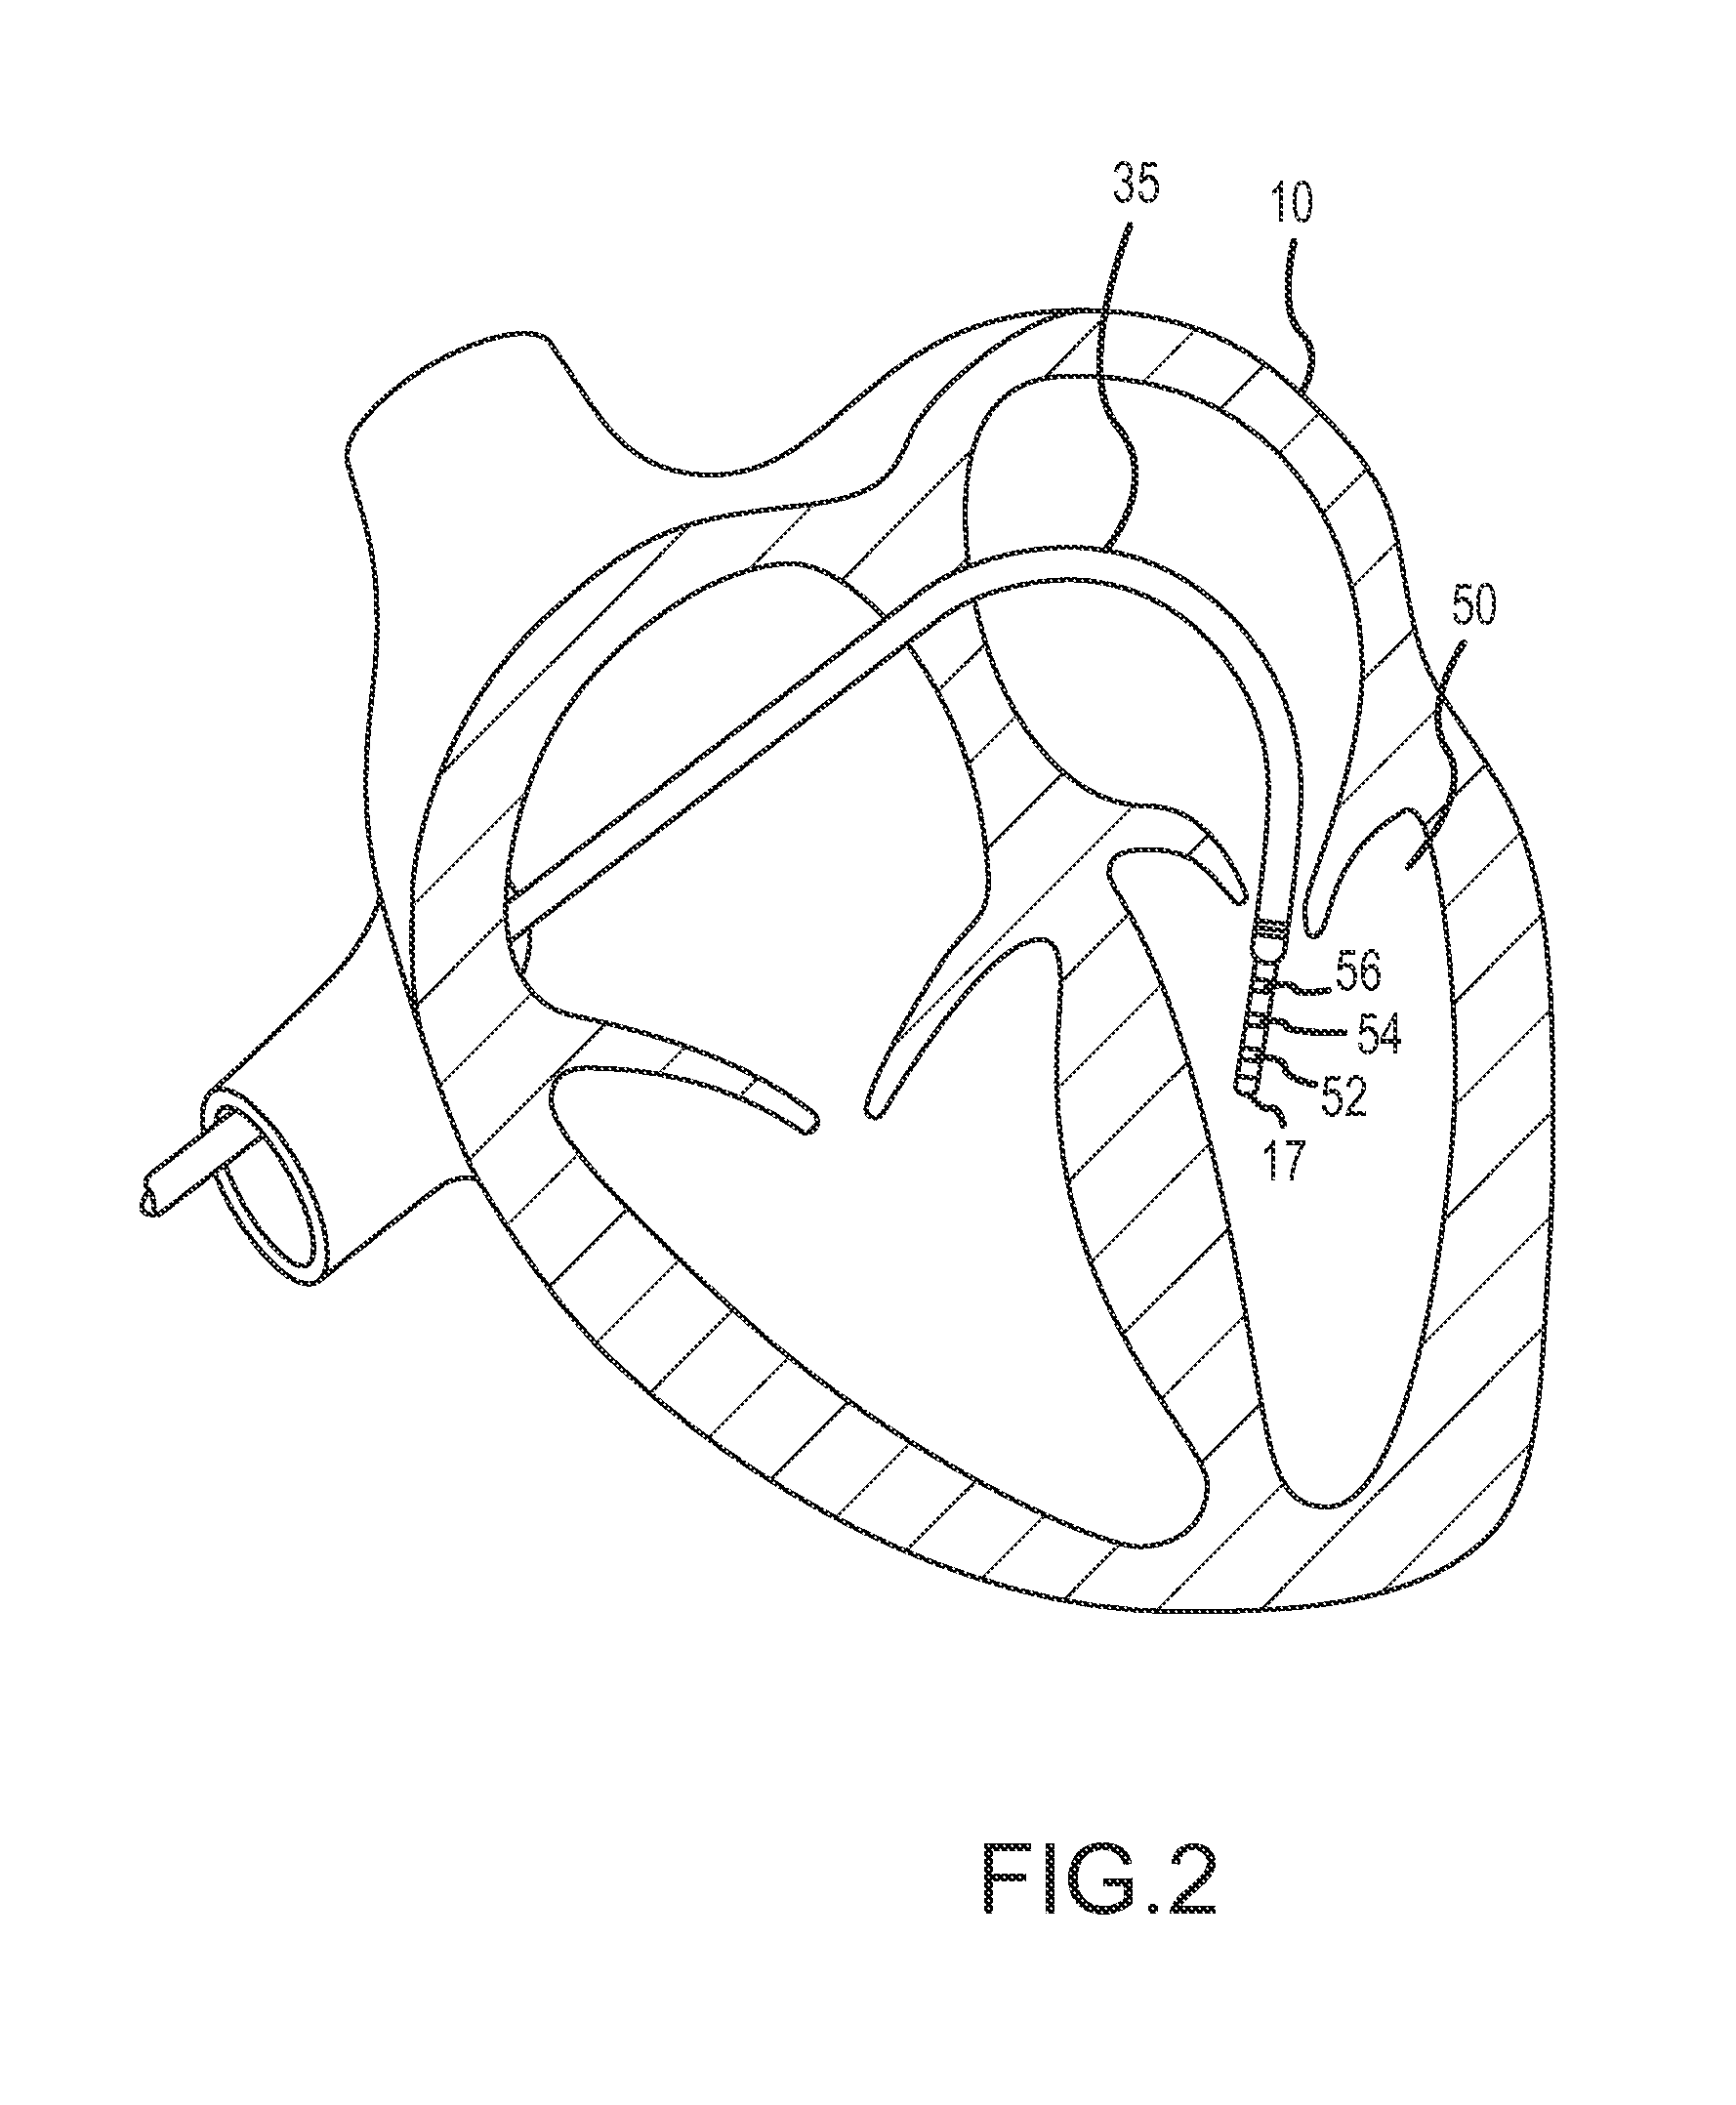 Systems and Methods for Generating, Storing, and Displaying Anatomical Maps